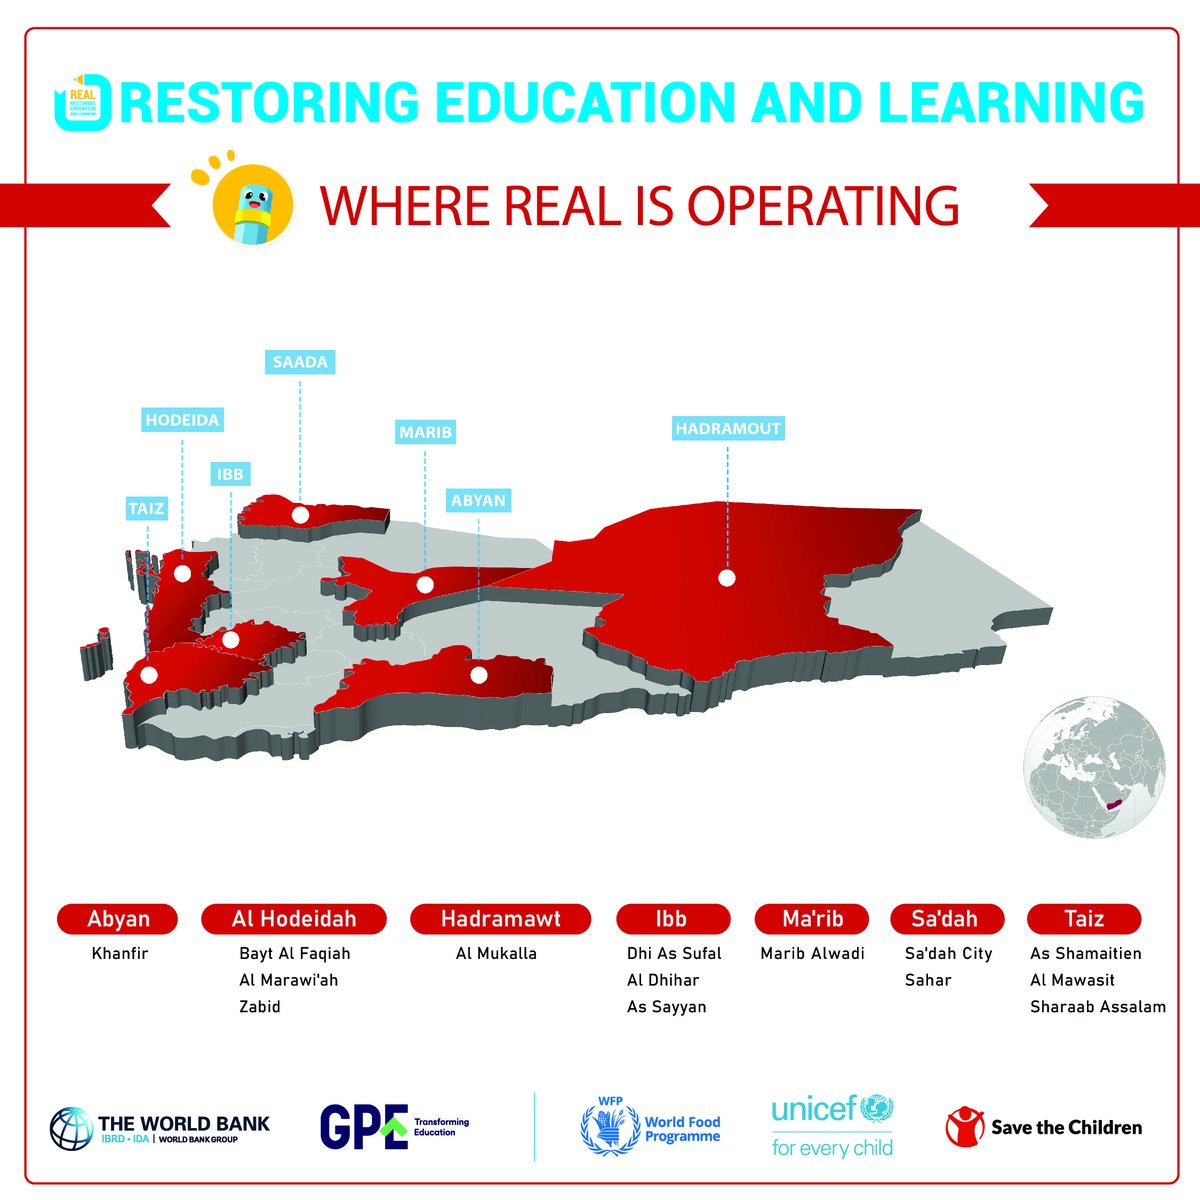 In partnership with @UNICEF & @WFP & supported by the @WorldBank & @GPforEducation, our #REAL project has trained 12,000+ educators in #Yemen on crucial skills to inspire and lead, improved literacy & numeracy for 23,000 students, & boosted school leadership in over 1,100 schools